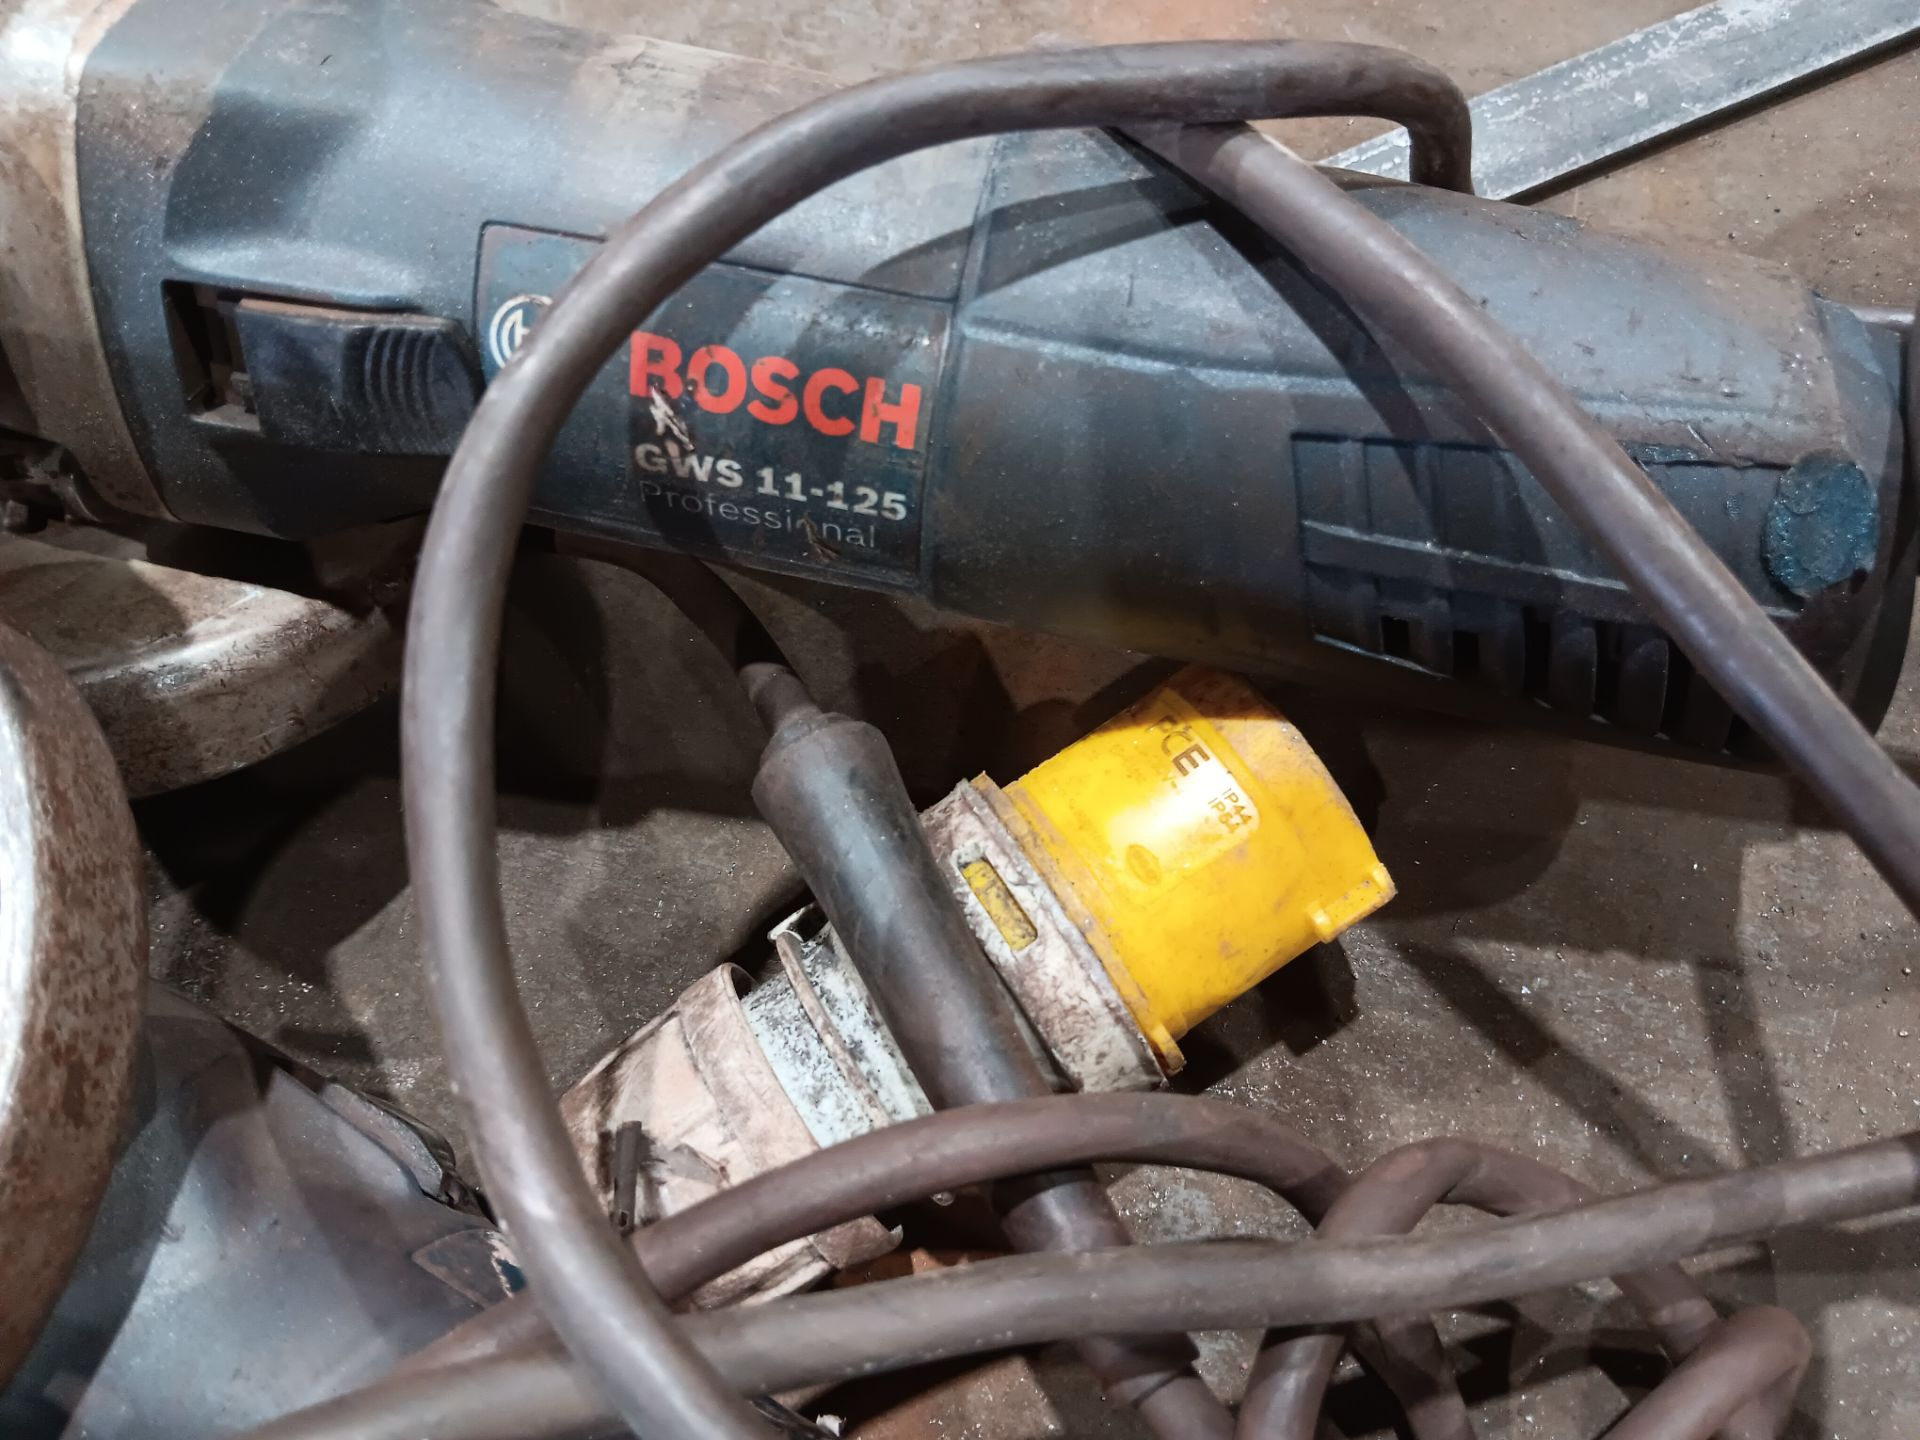 6 x Bosch angle grinders 110v - Image 2 of 2